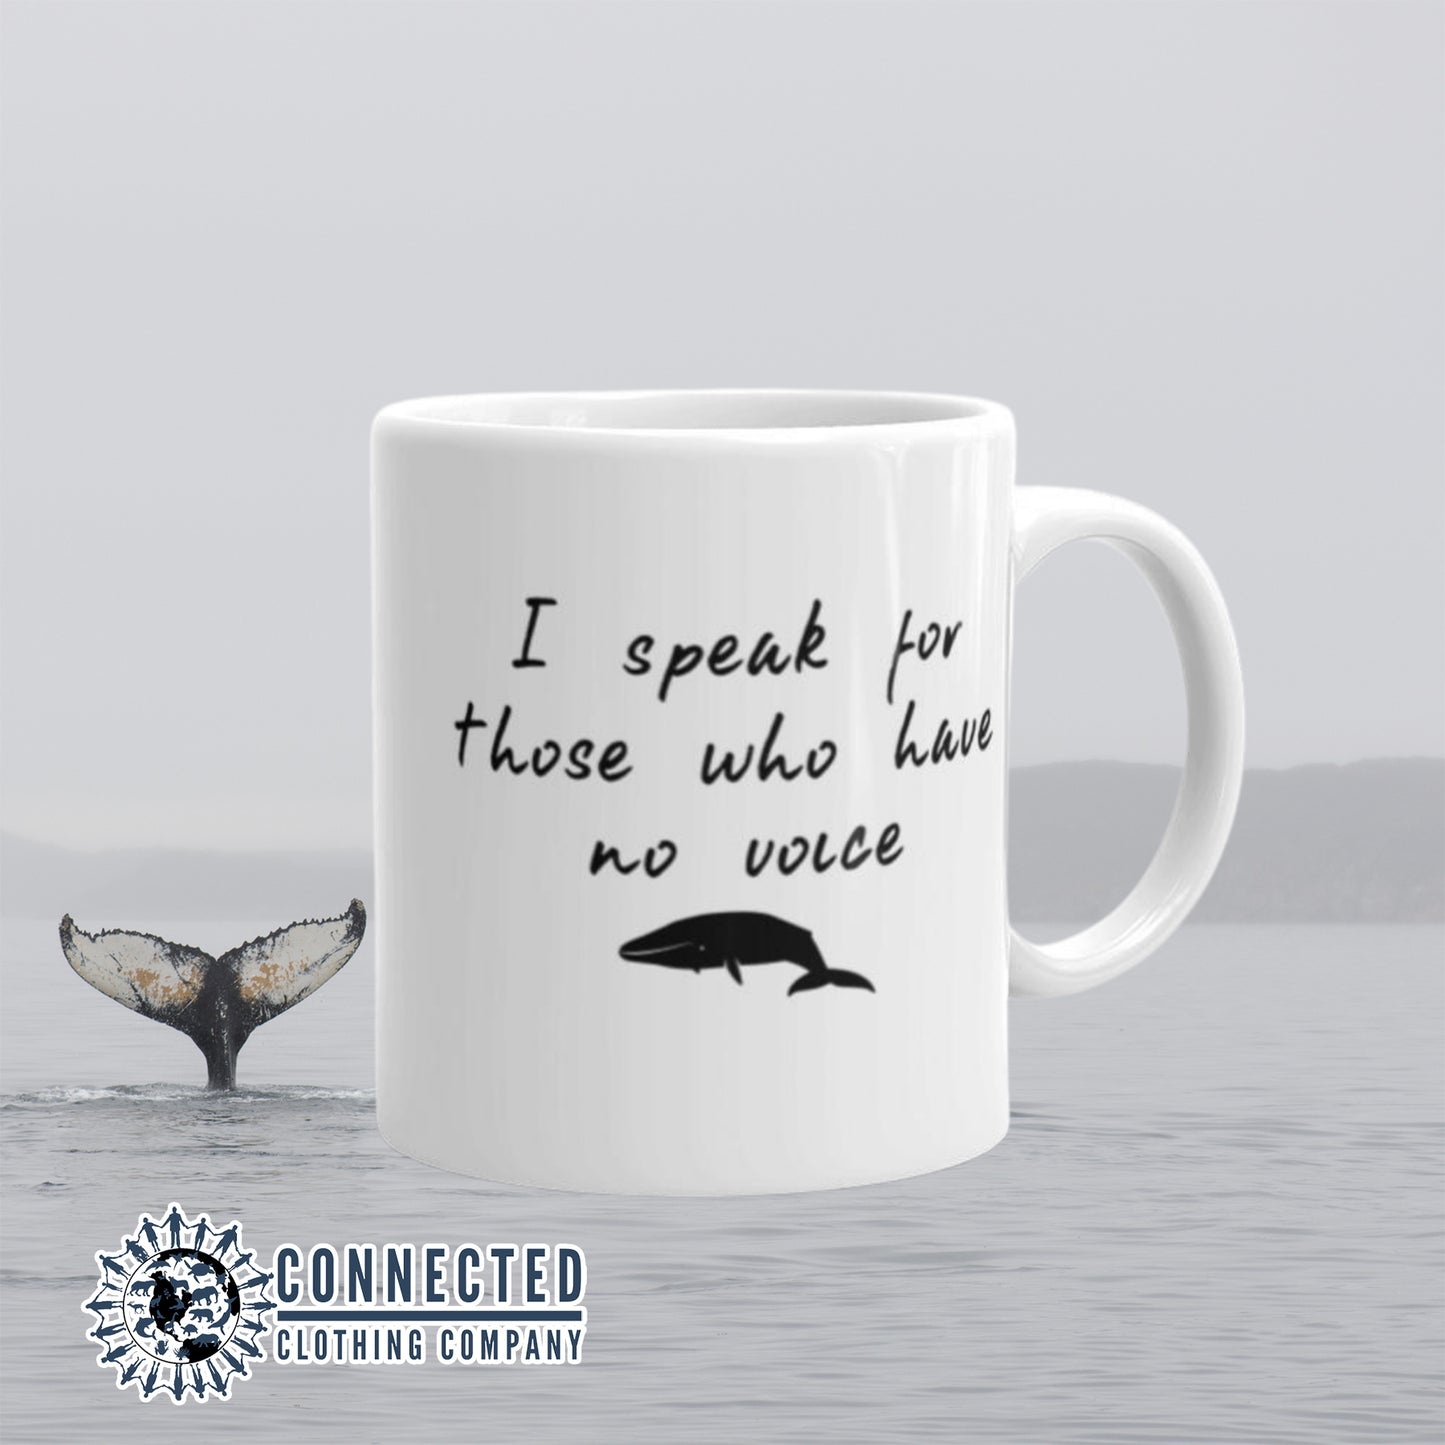 Be The Voice Whale Classic Mug - Connected Clothing Company donates 10% of the profits from this mug to Mission Blue ocean conservation